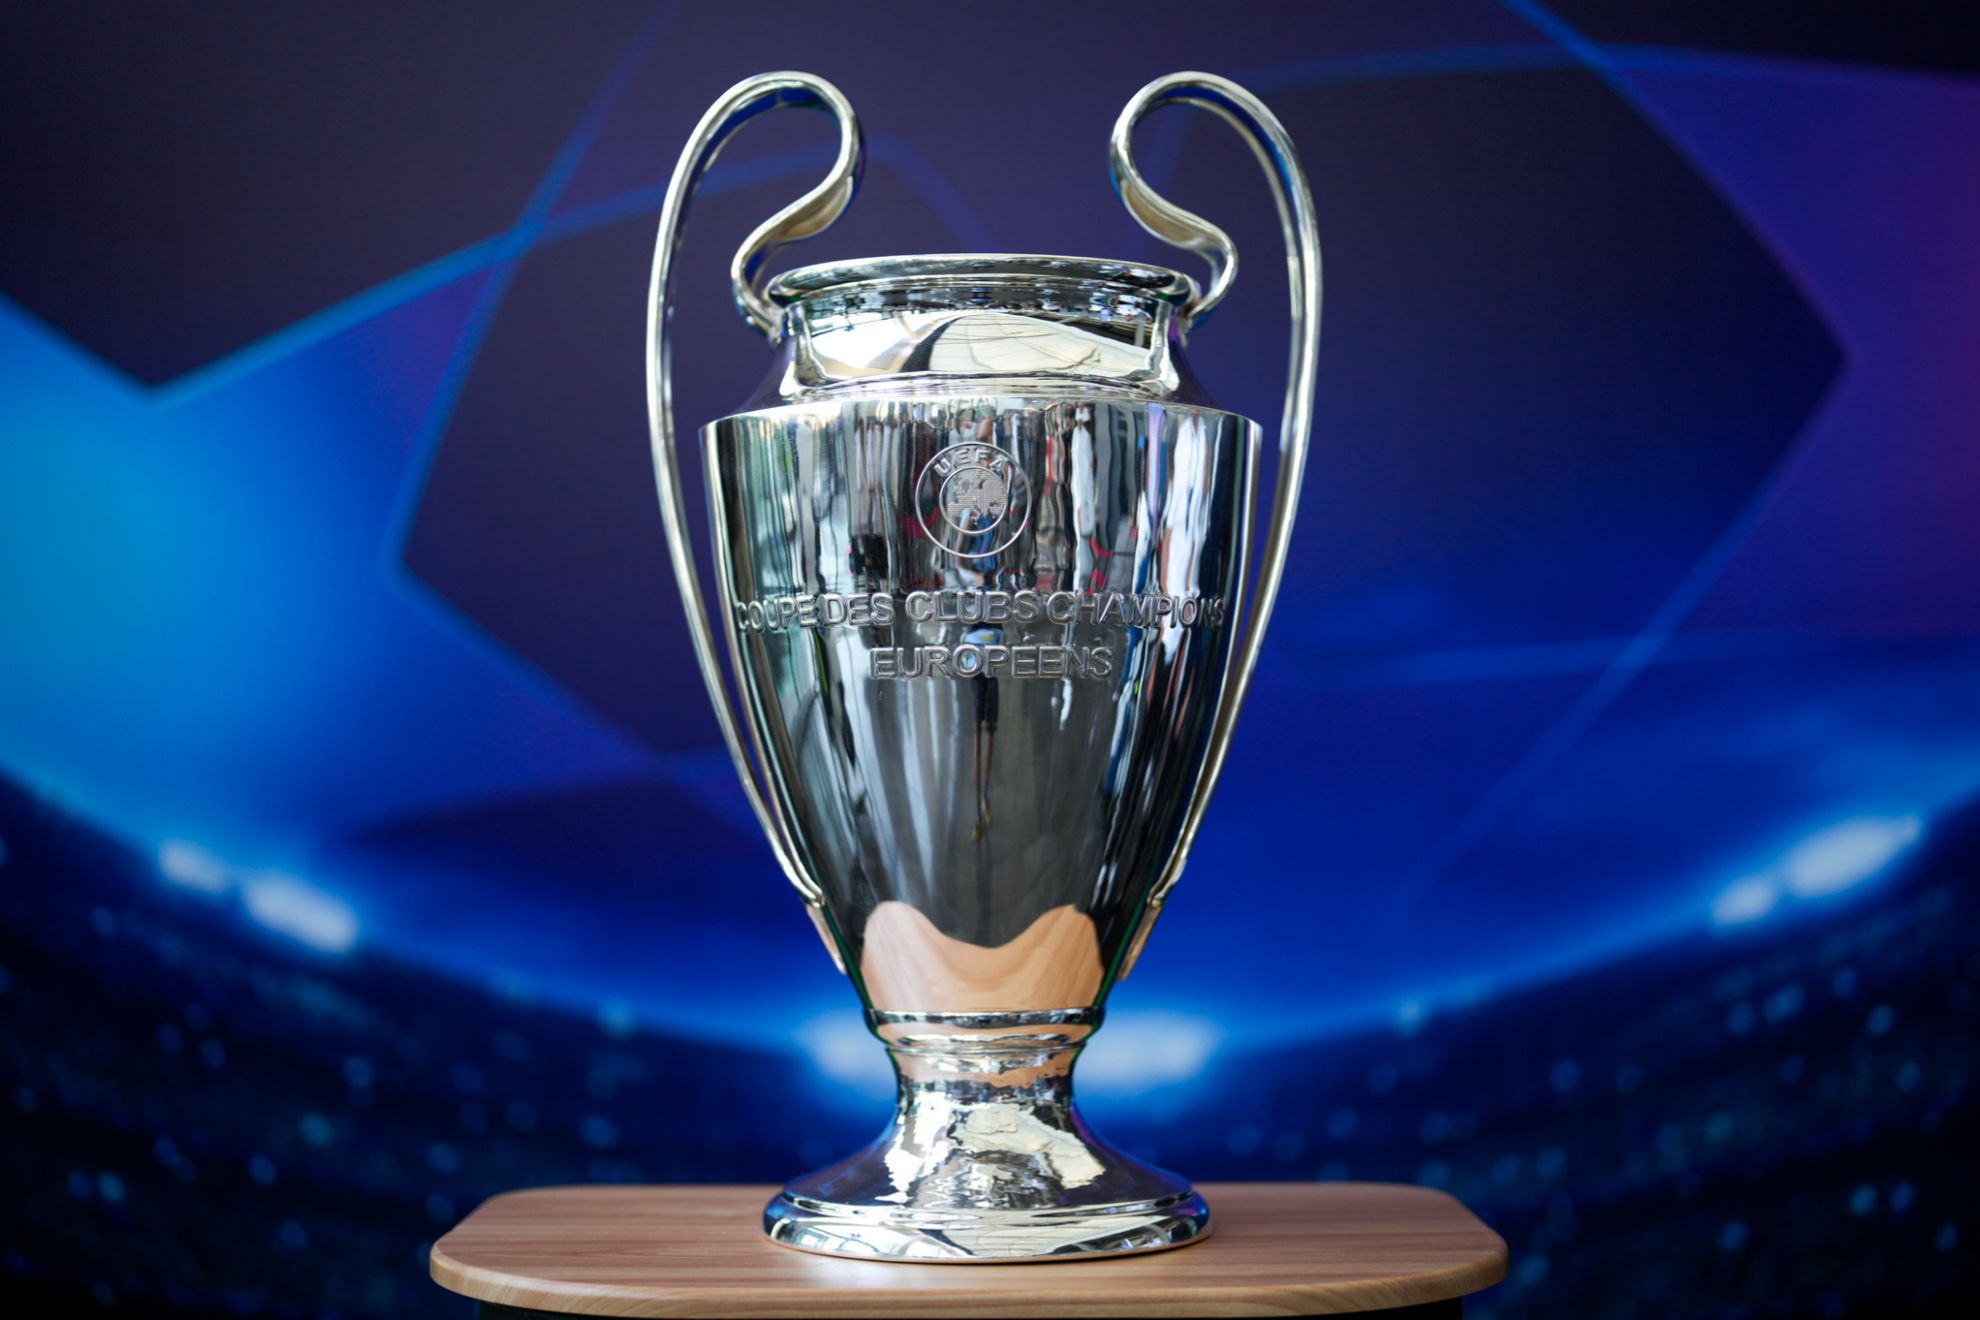 Real Madrid behind Bayern Munich: odds to win 2023/24 Champions League -  Football